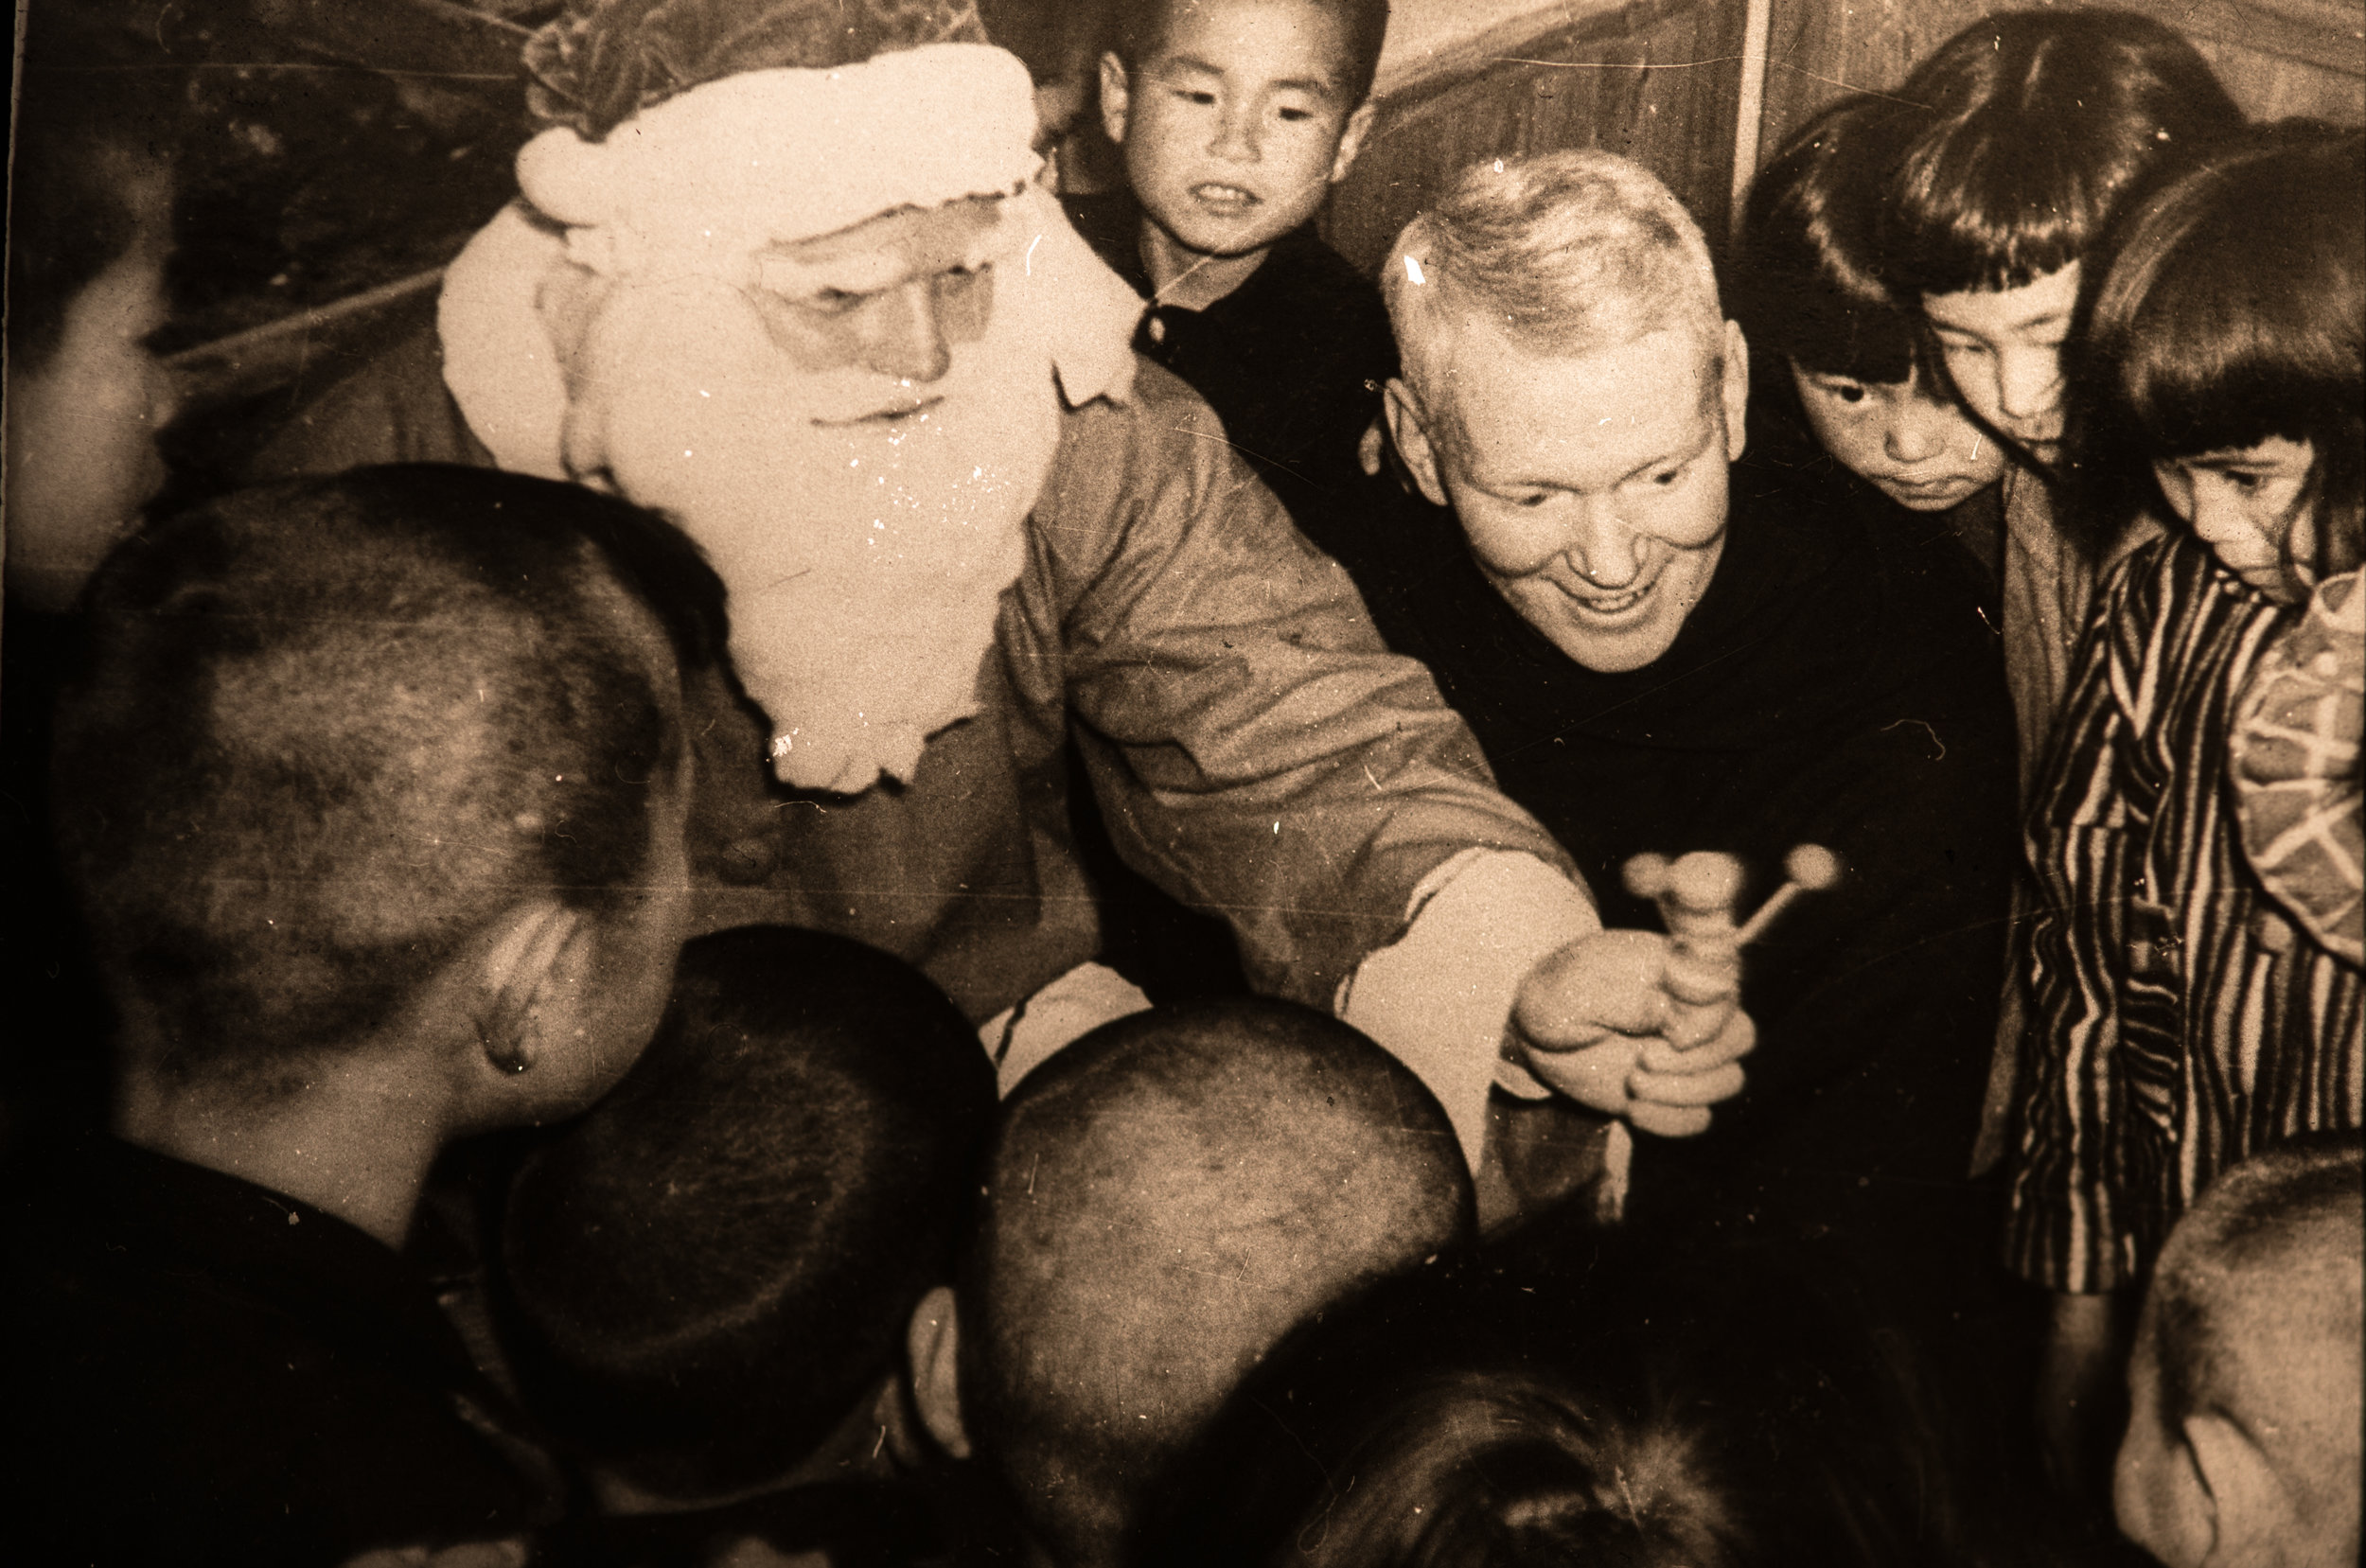 Dec 1955 Father Robinson (Santa) and Father Purcell with children.